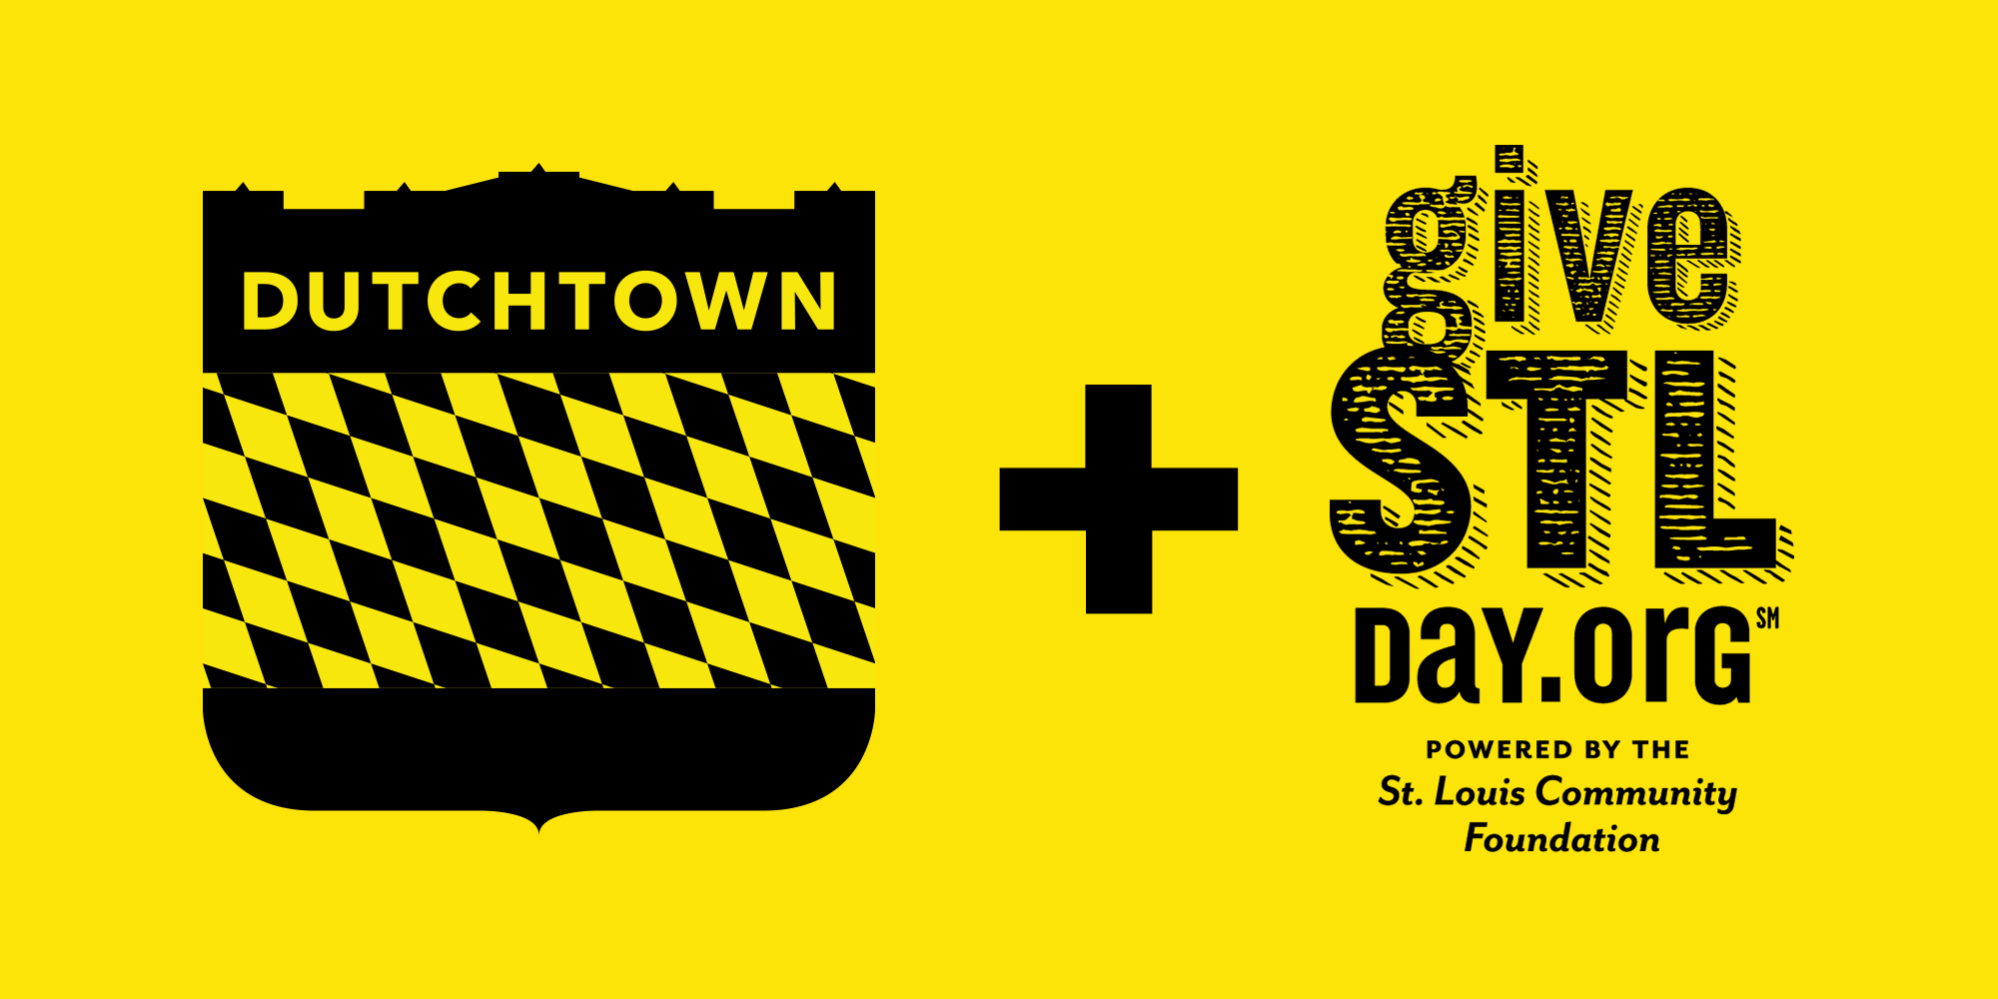 Support Dutchtown on Give STL Day